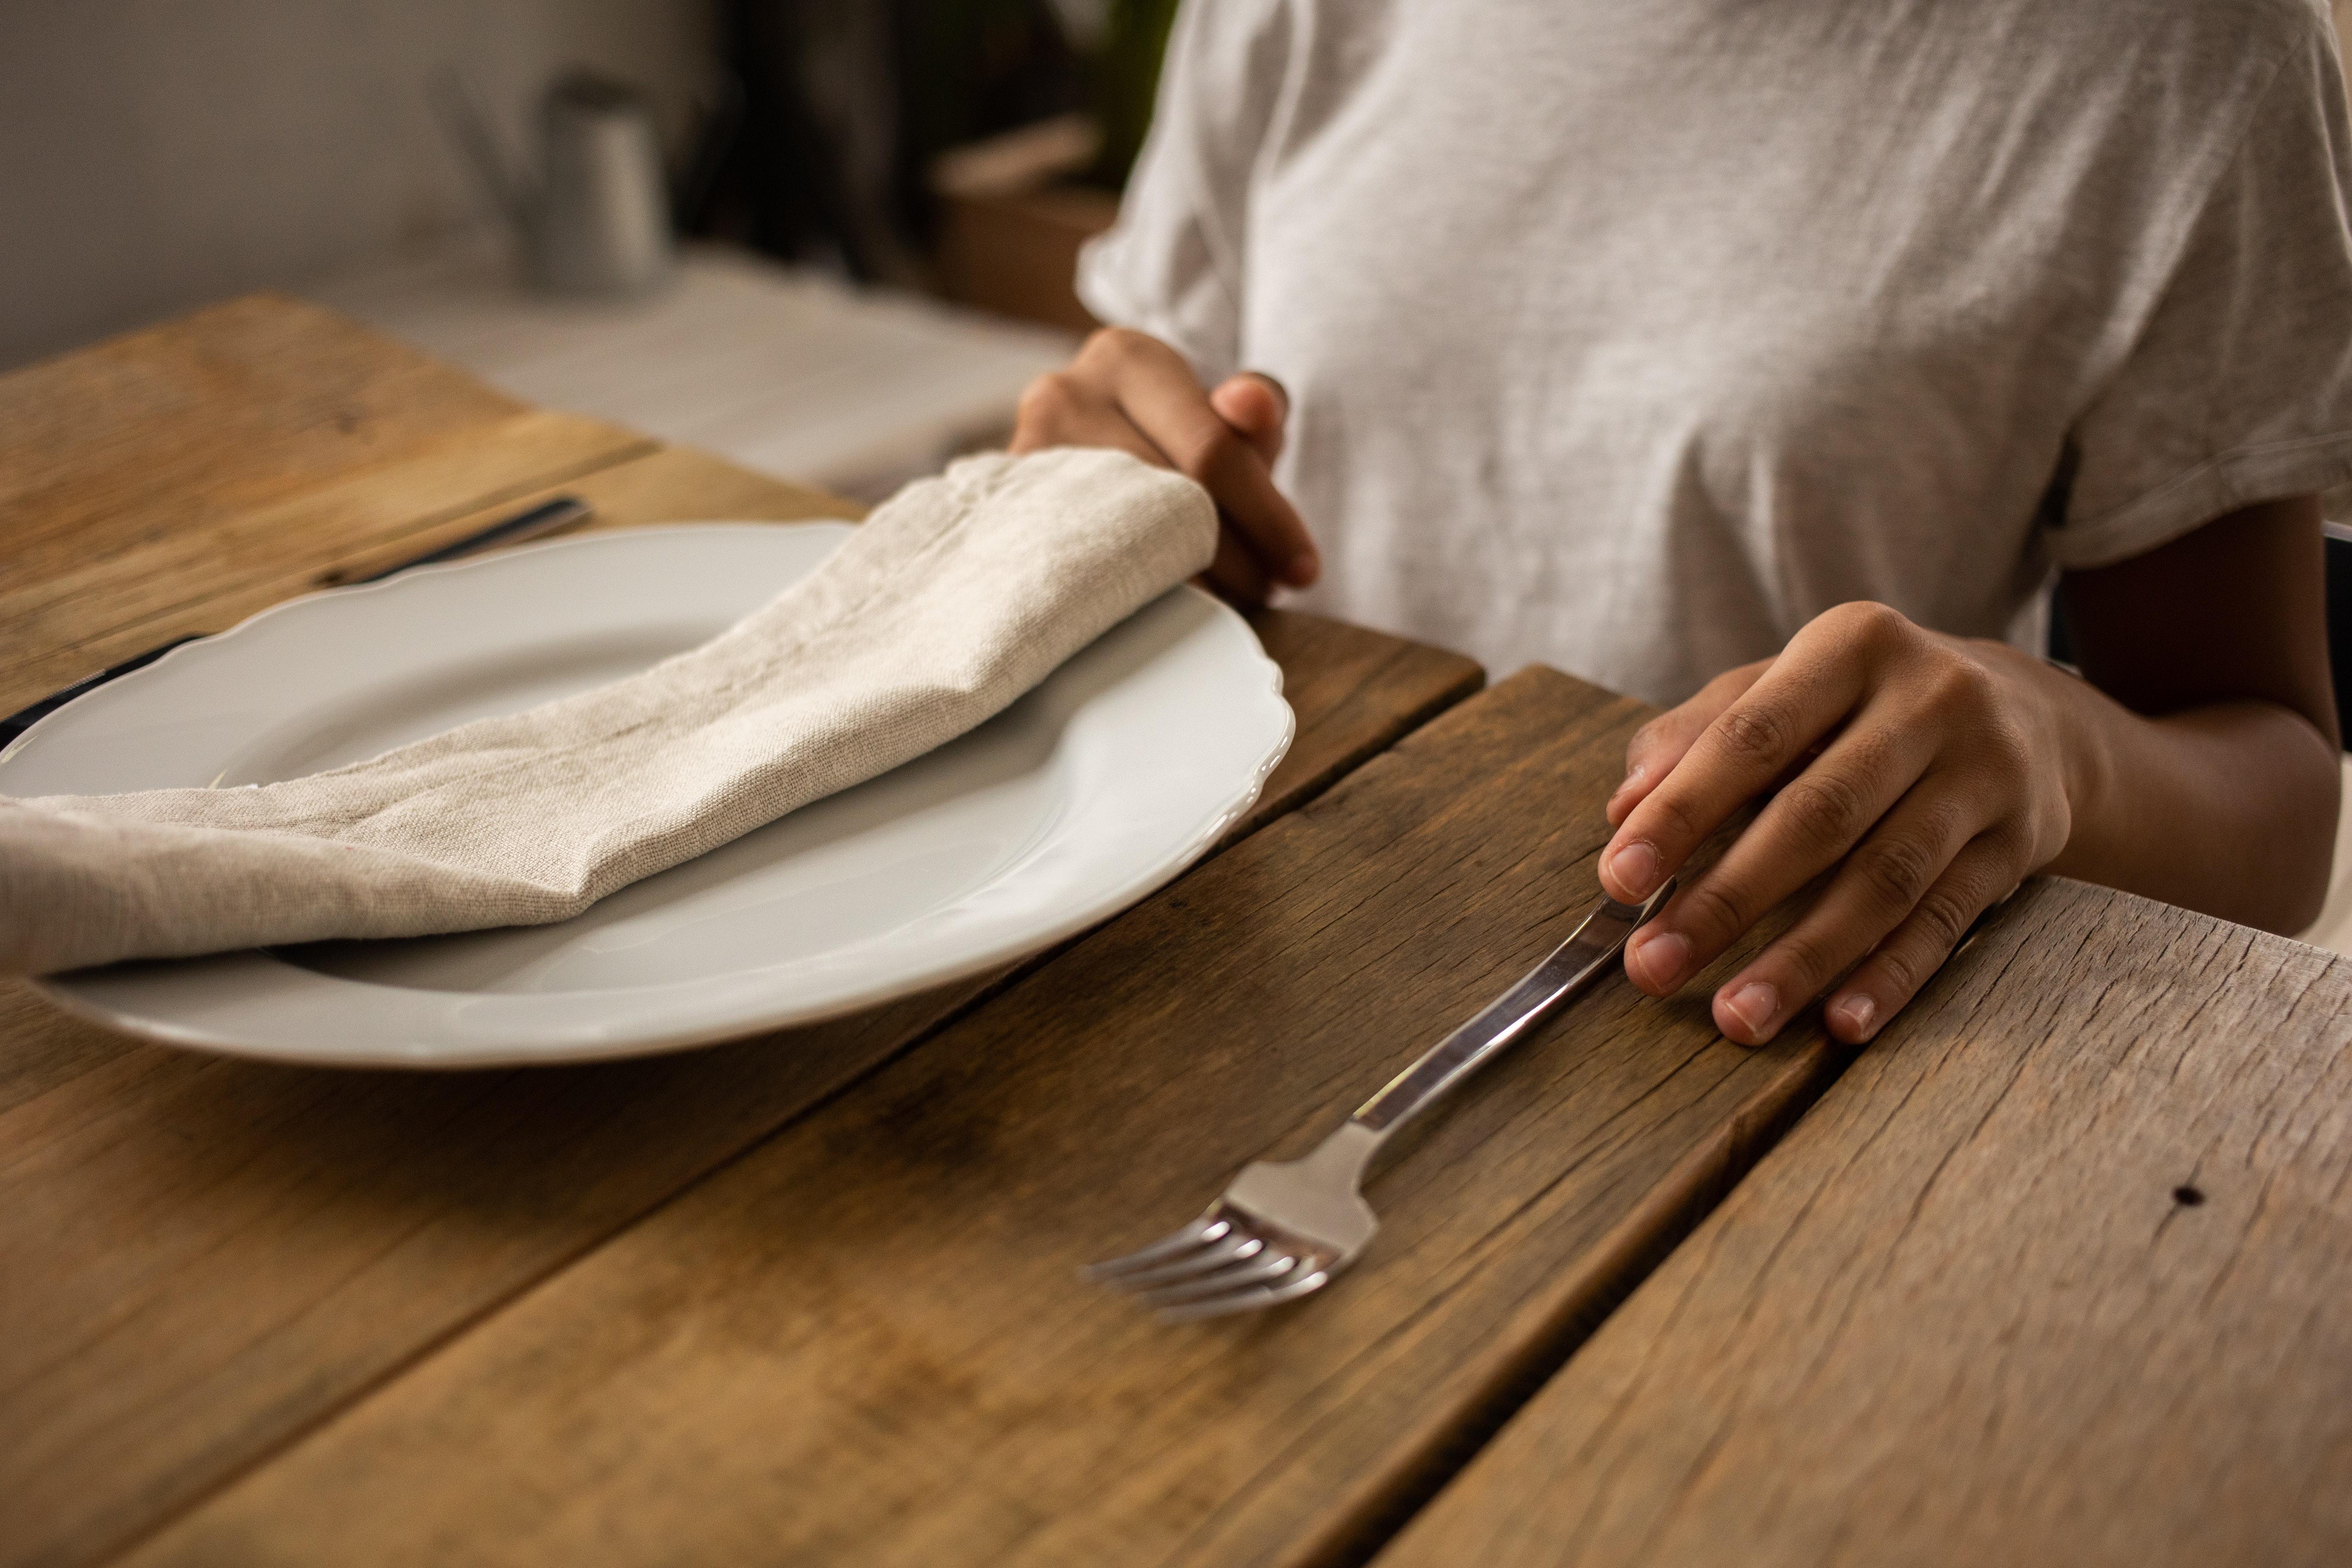 What is the importance of table manners? 